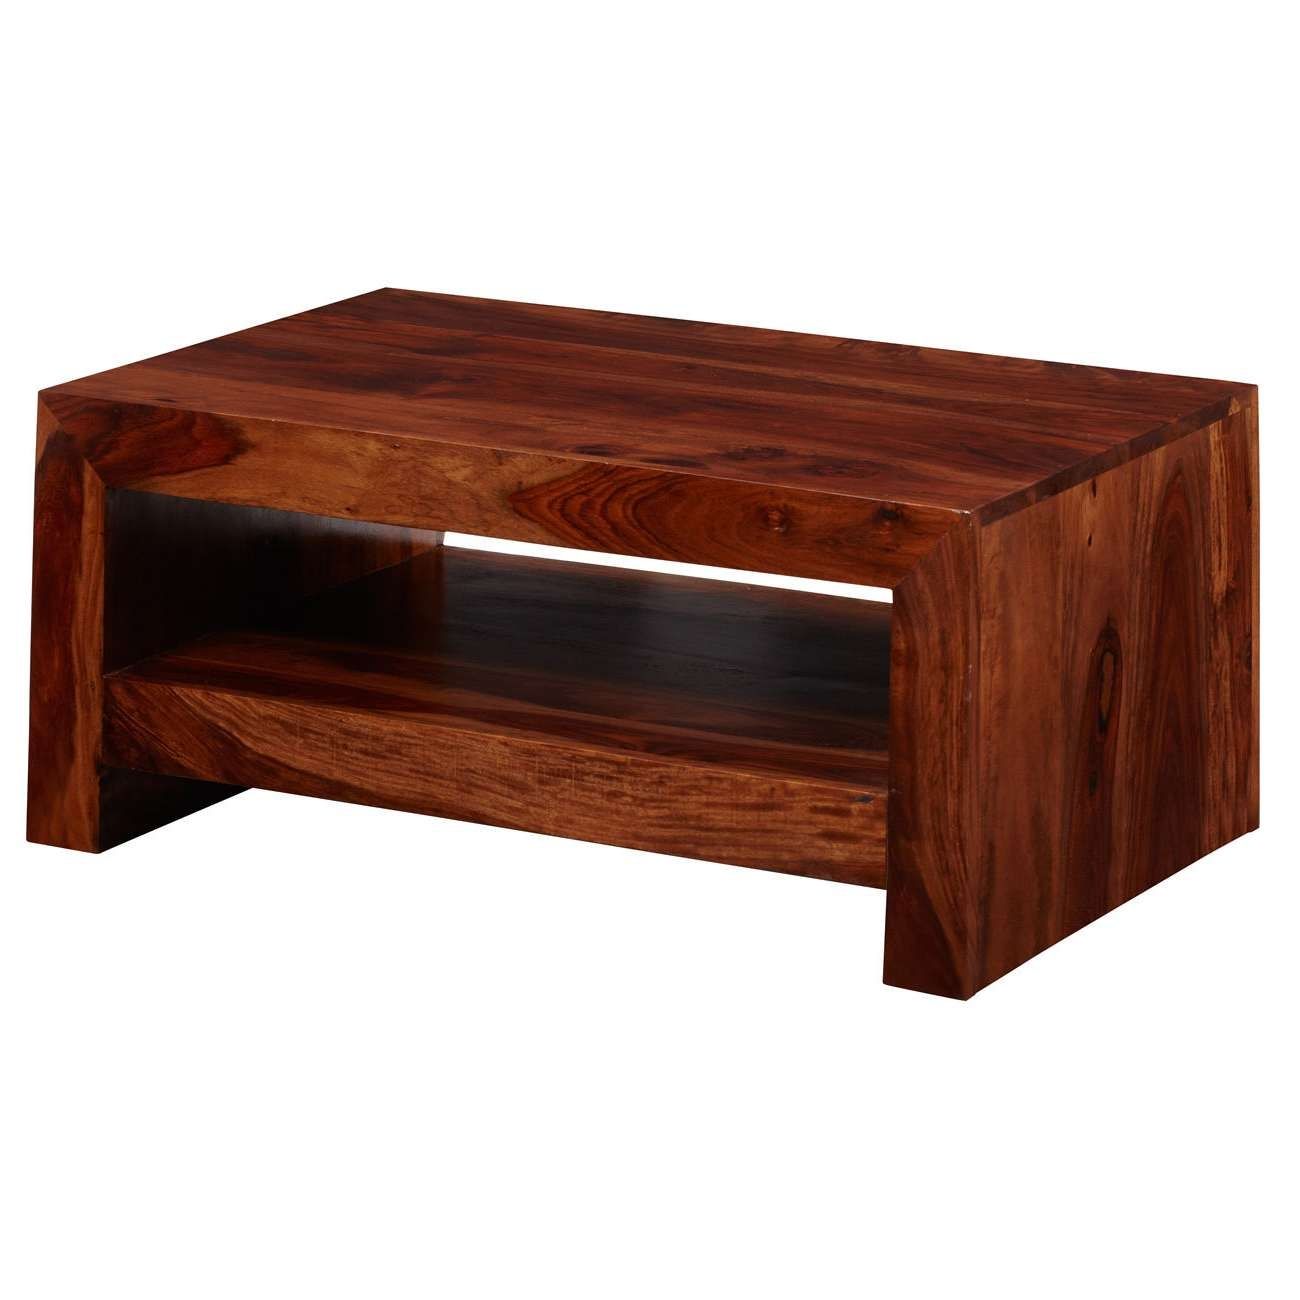 Salient Photos Gallery Solid Wood Coffee Table Designs Solid Wood Pertaining To Favorite Large Solid Wood Coffee Tables (View 17 of 20)